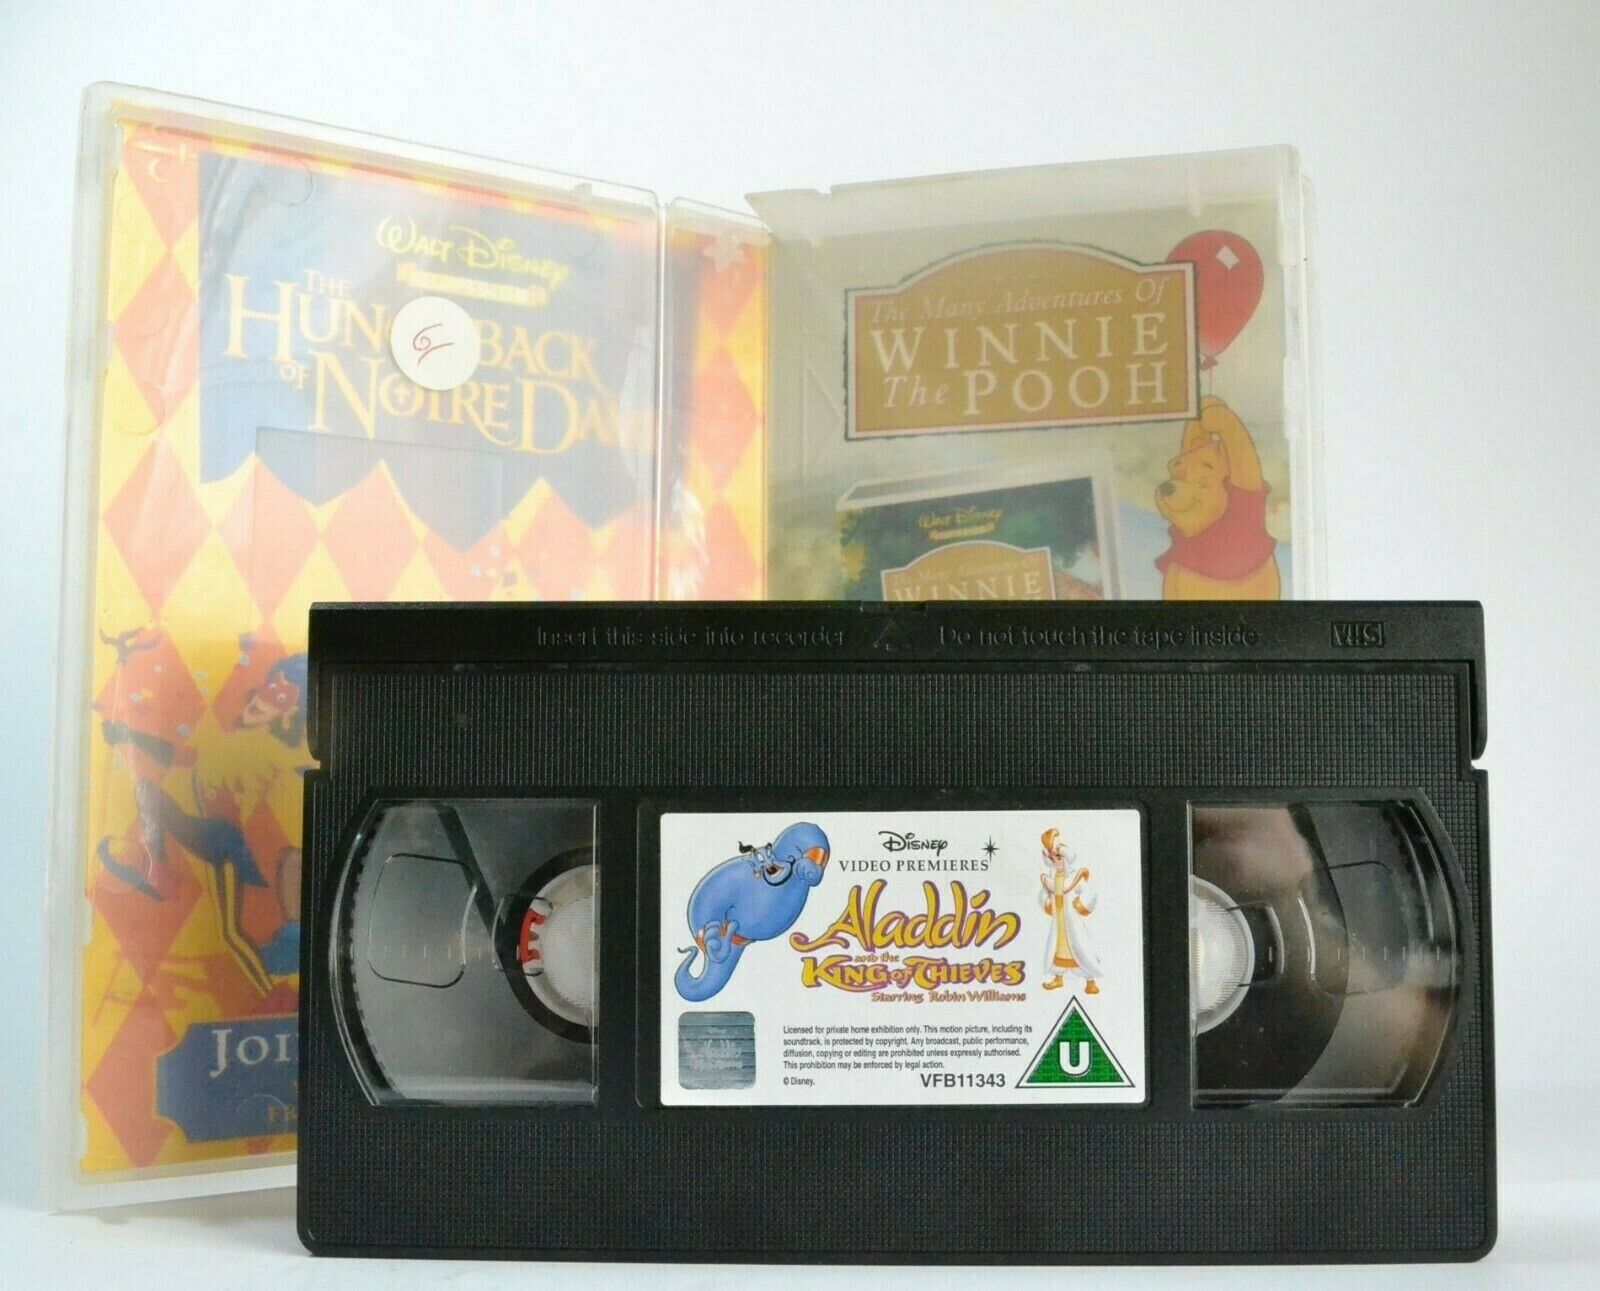 Aladdin And The King Of Thieves [Walt Disney] - Animated - Robin Williams - VHS-